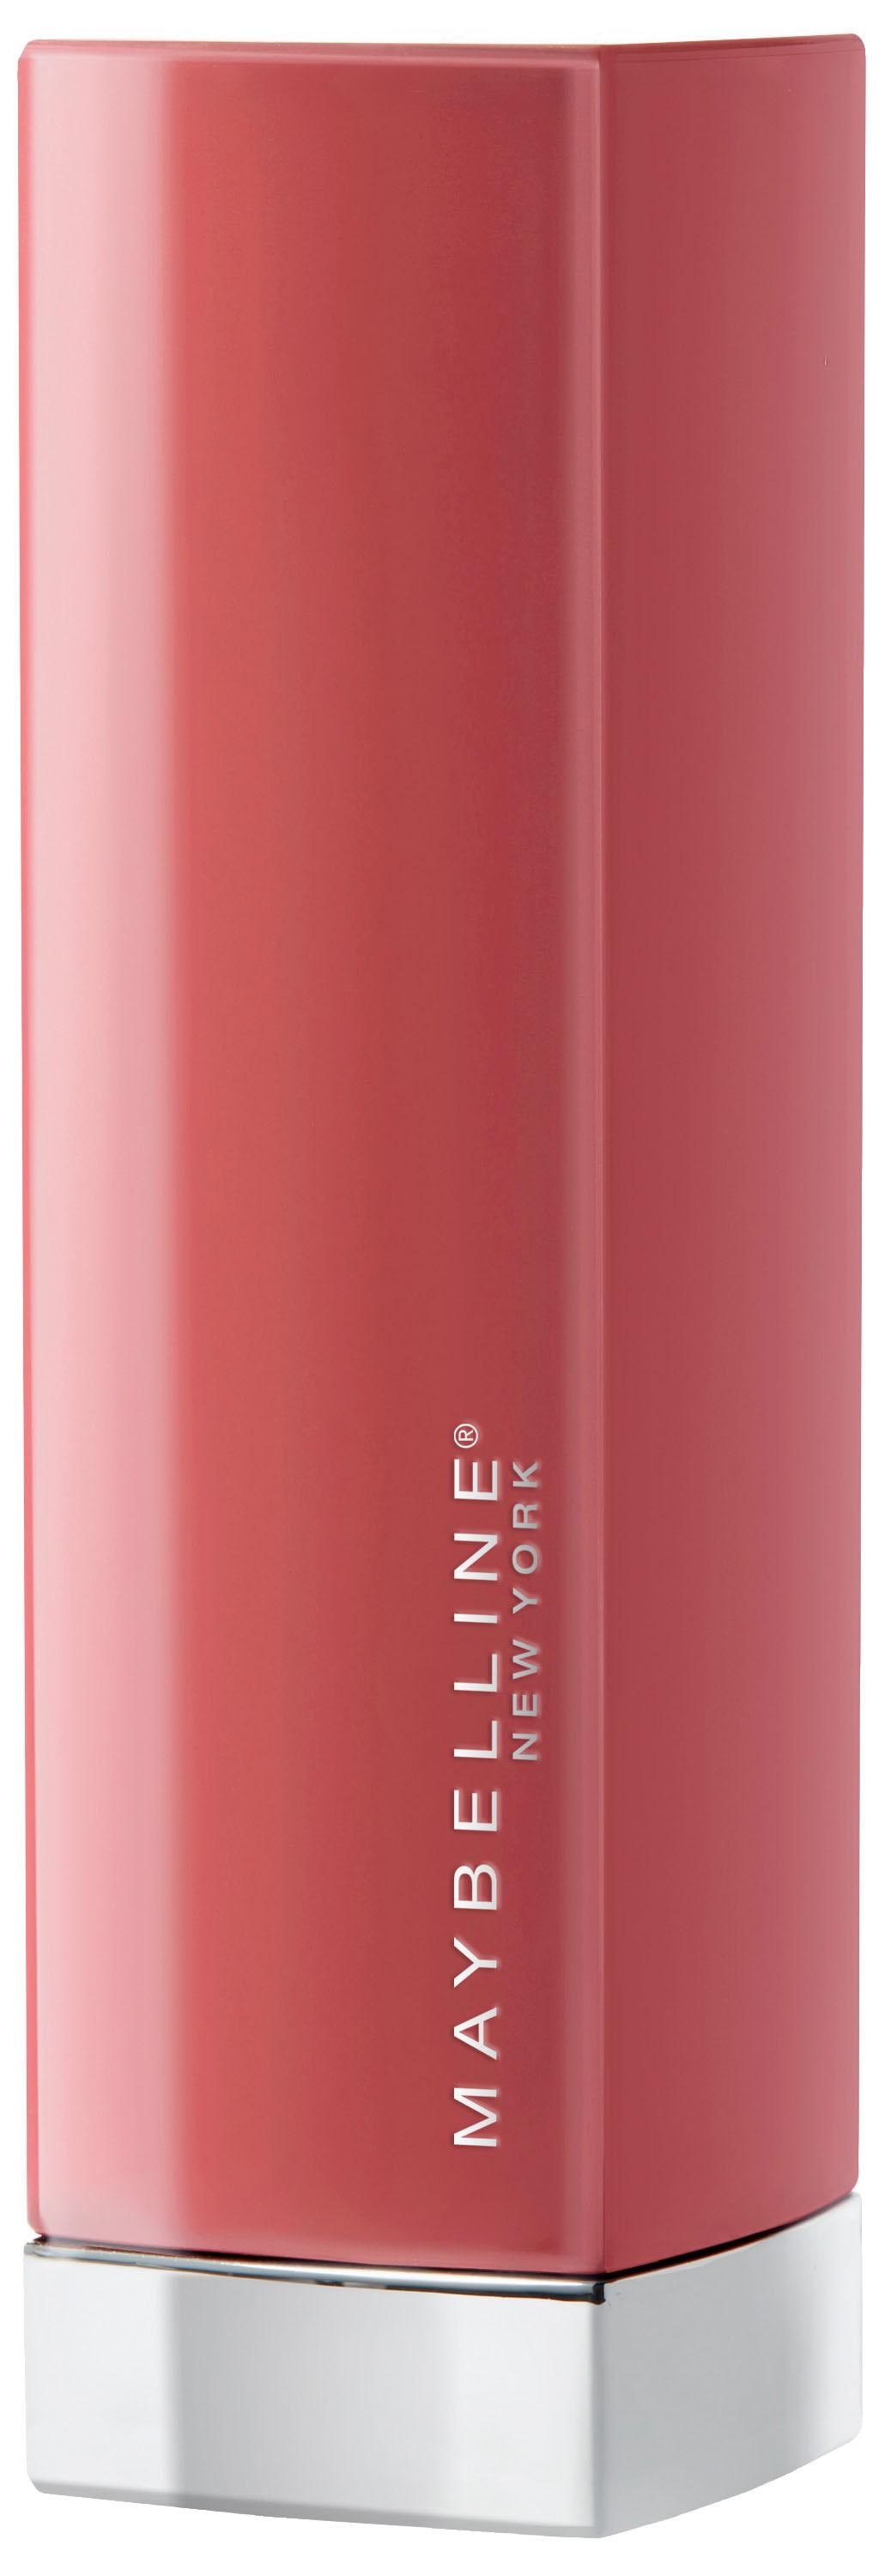 MAYBELLINE NEW YORK Lippenstift »Color Sensational Made For All«